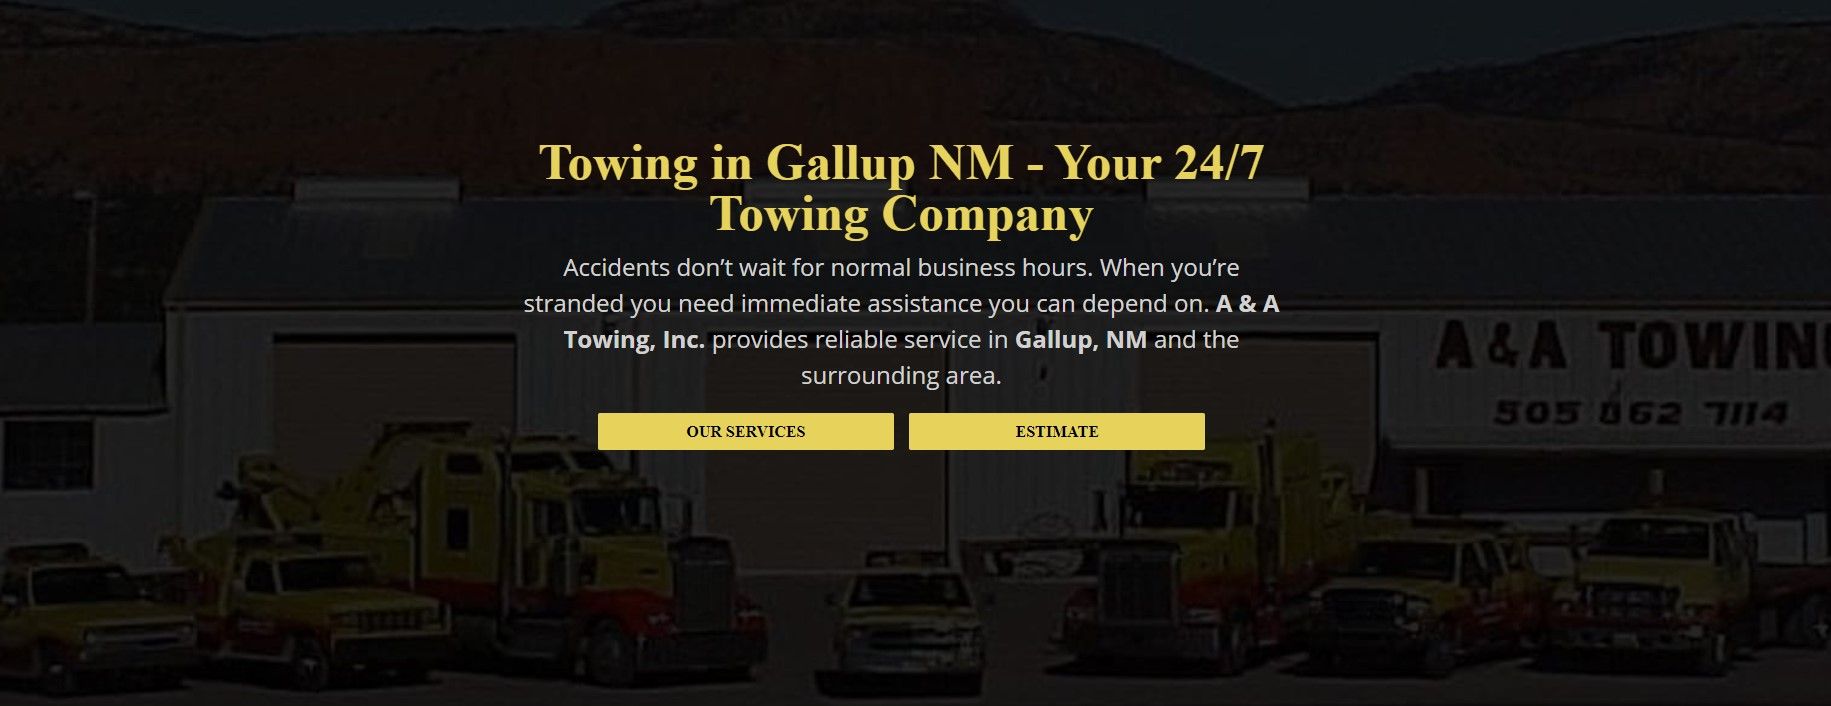 A & A Towing